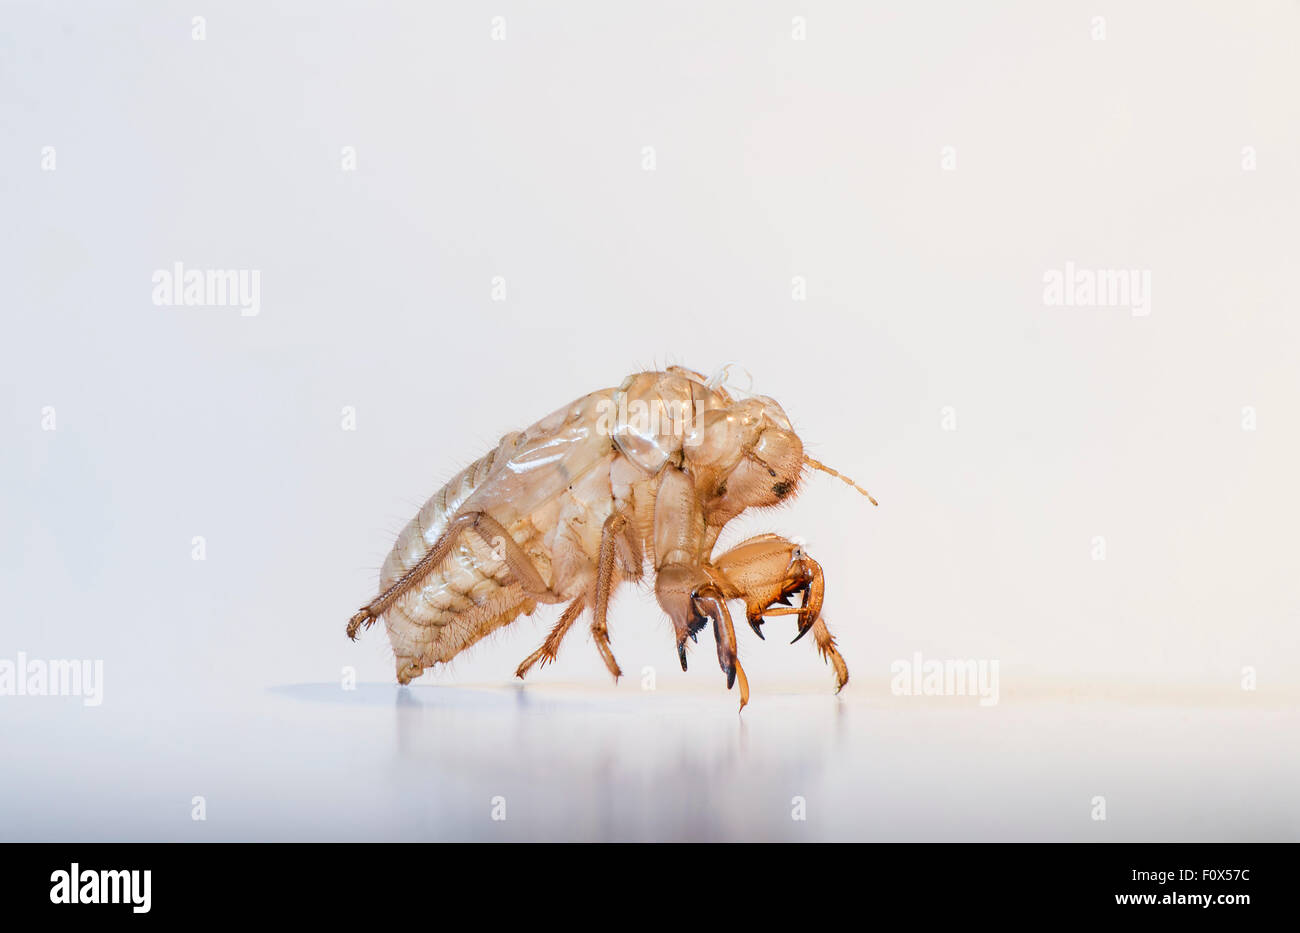 cicada-empty-nymph-shell-andalusia-spain